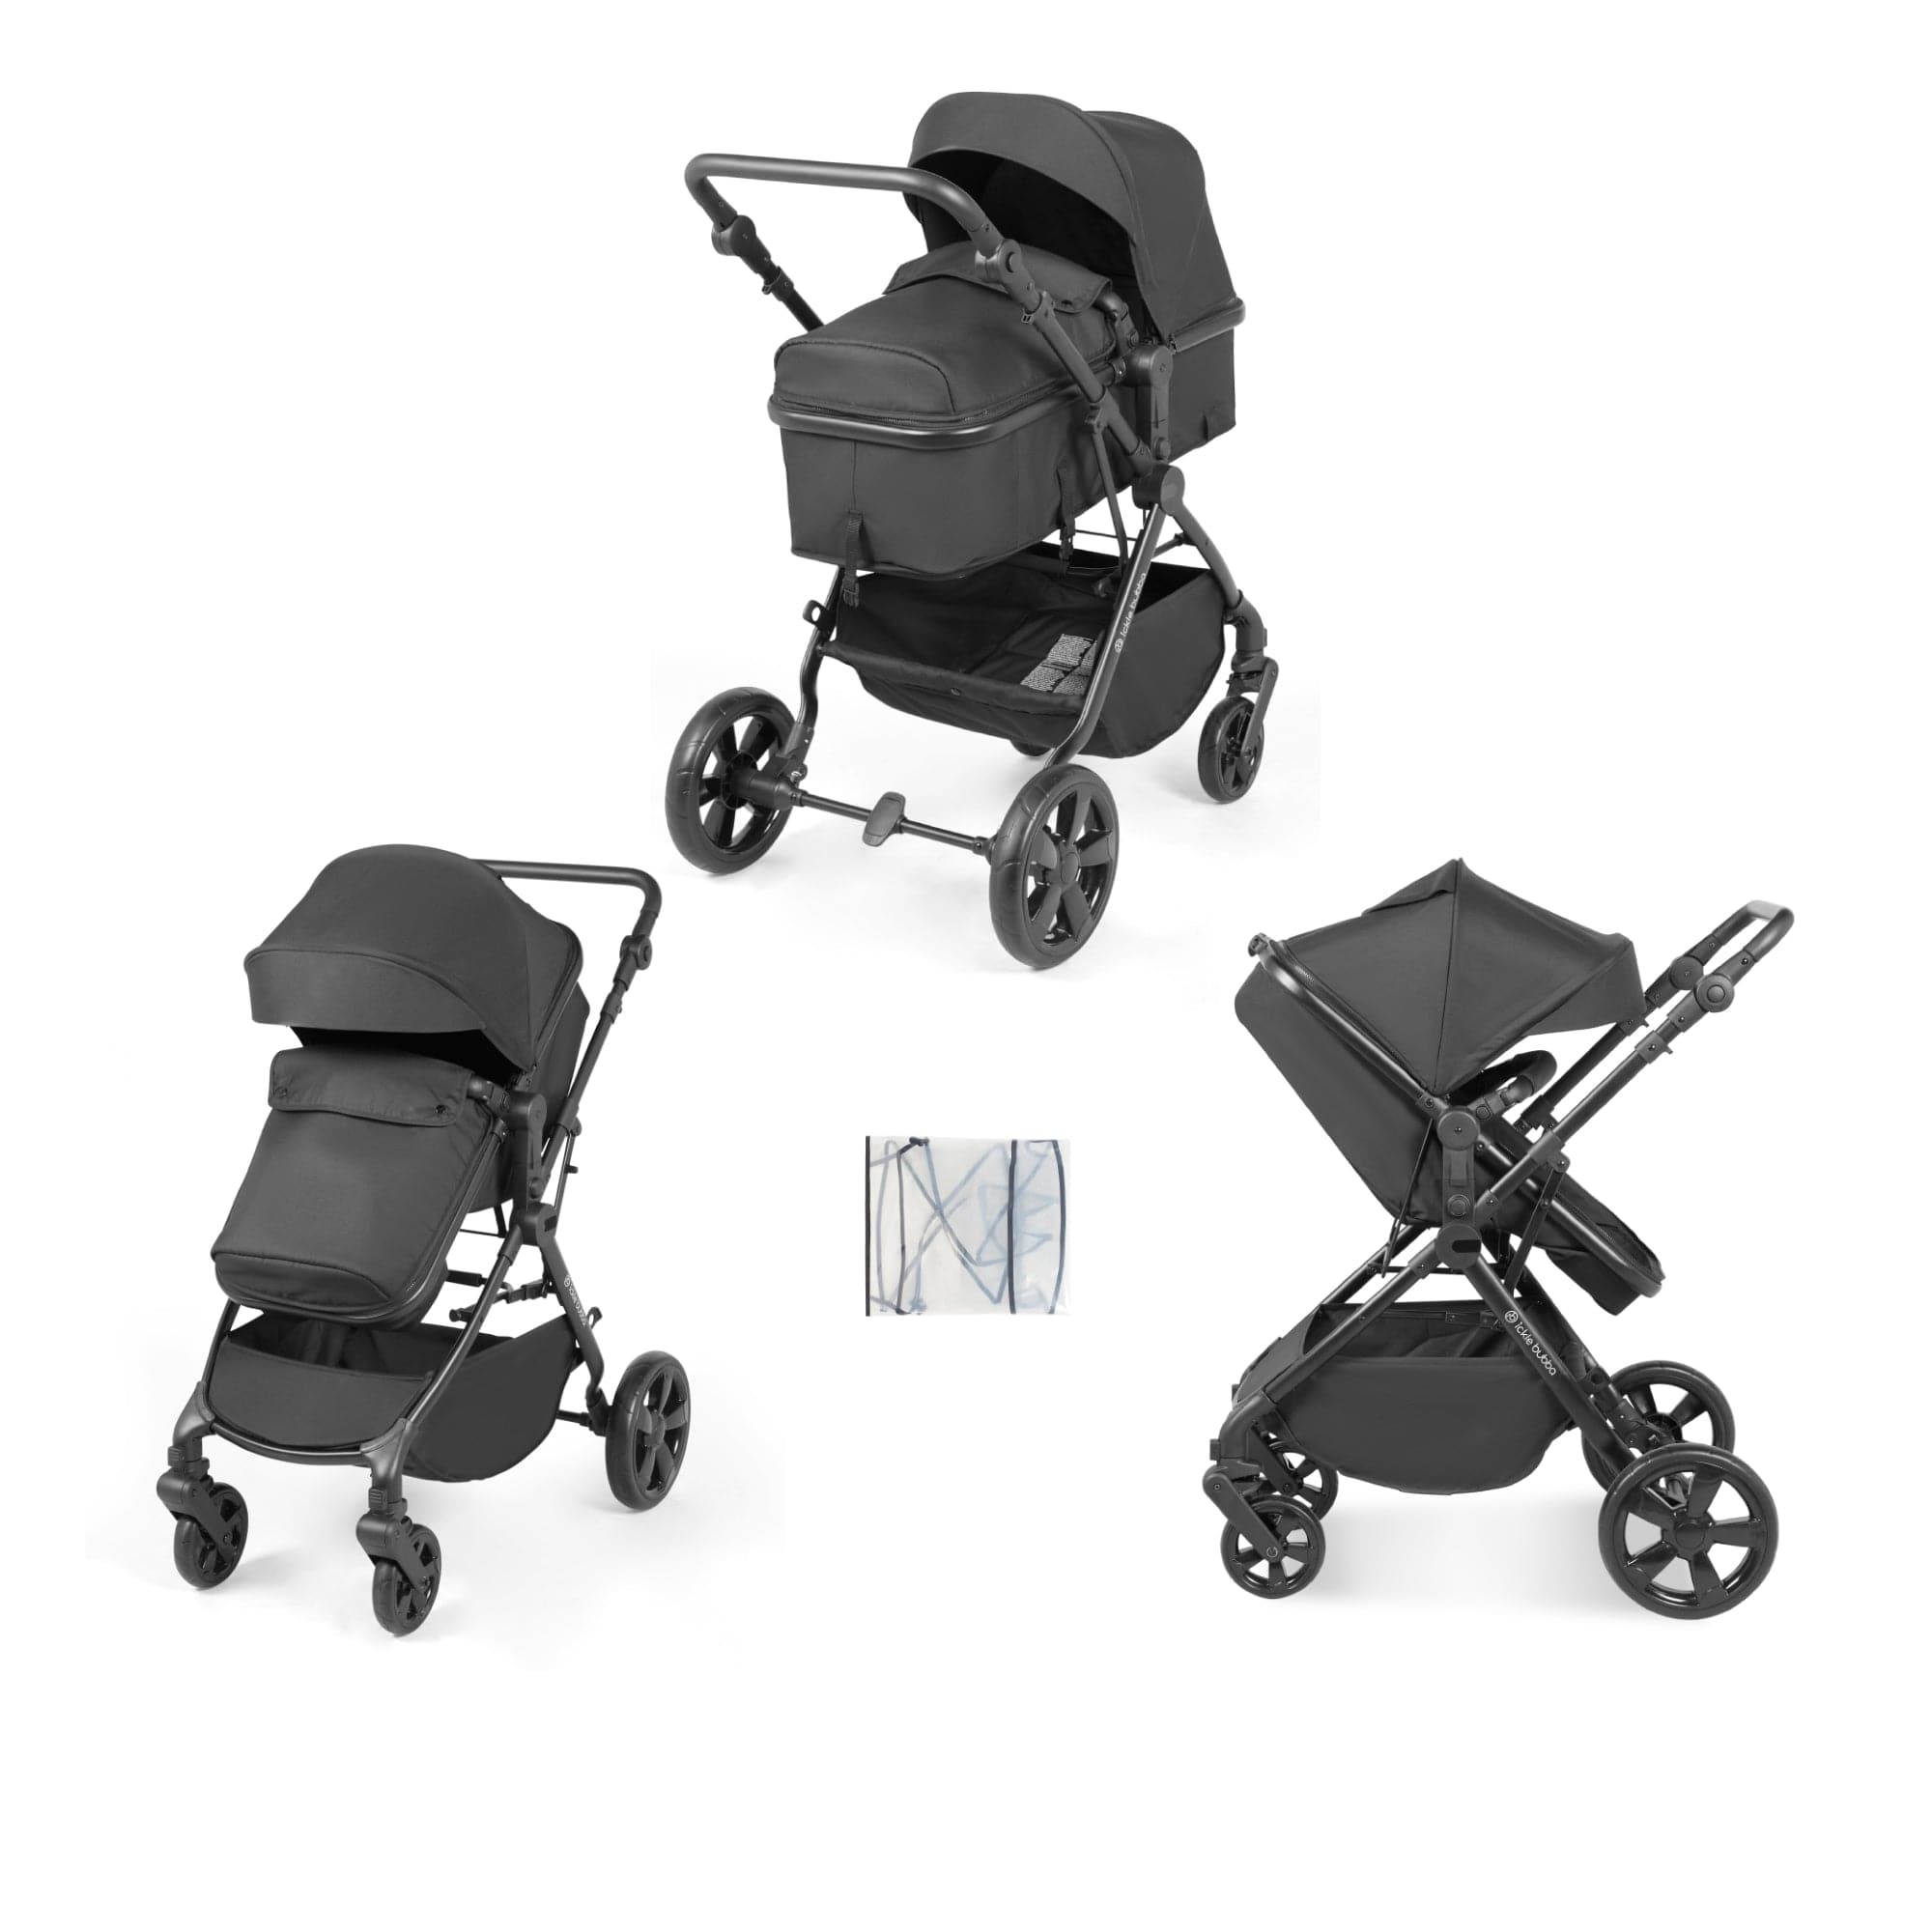 Ickle Bubba Stomp V4 - Travel systems - Pushchairs